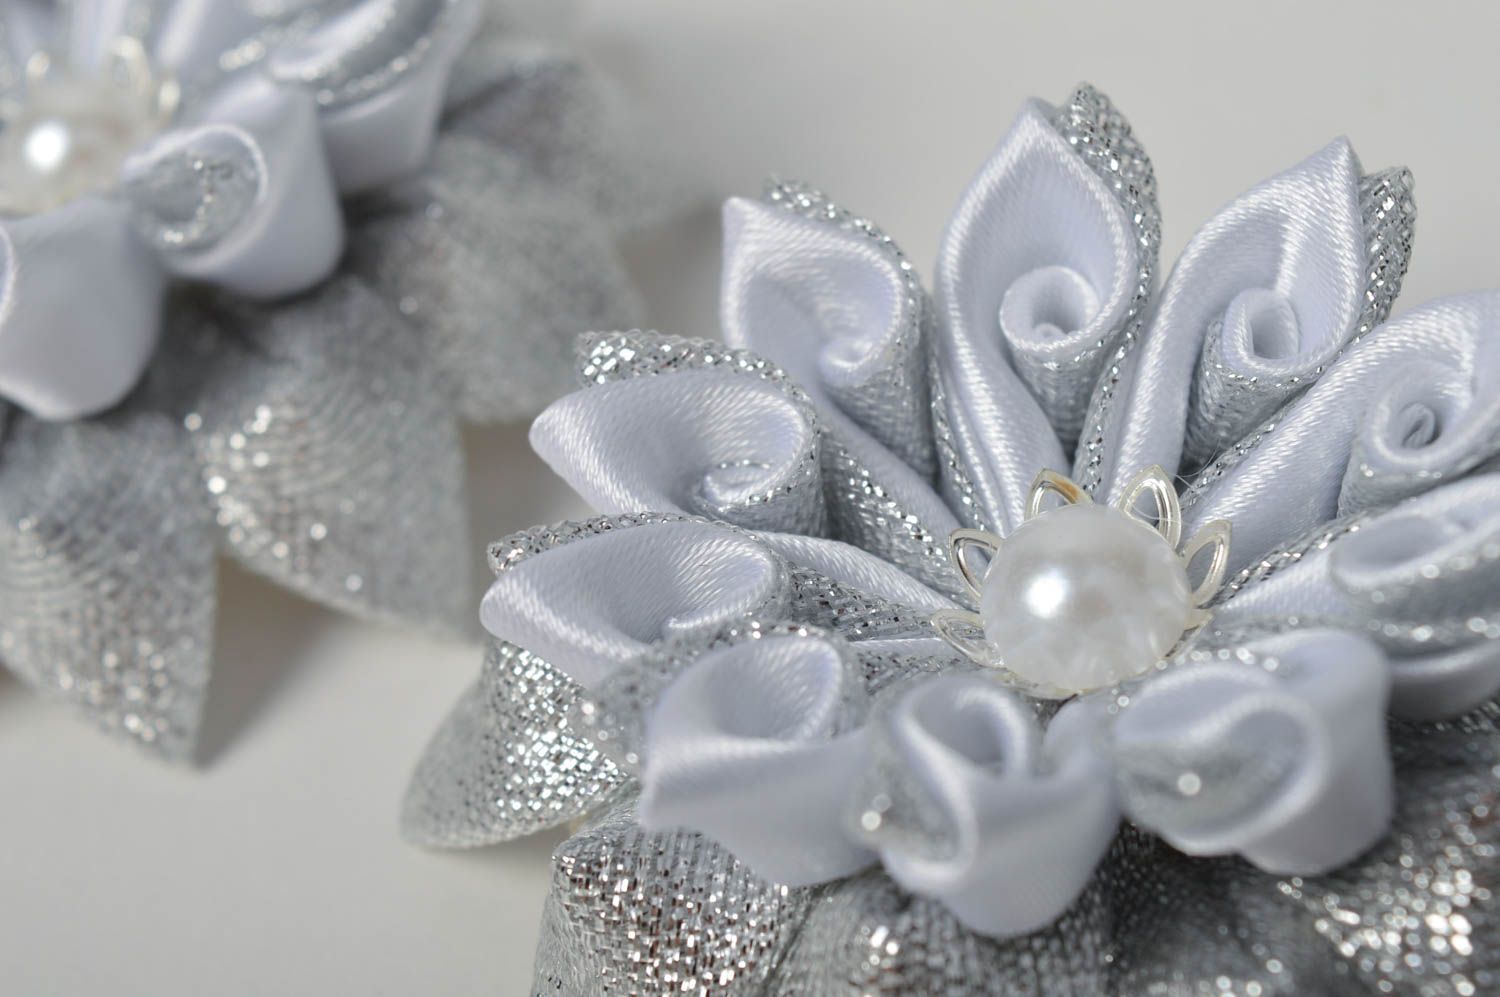 Unusual handmade textile barrette kanzashi flower 2 pieces gifts for her photo 2